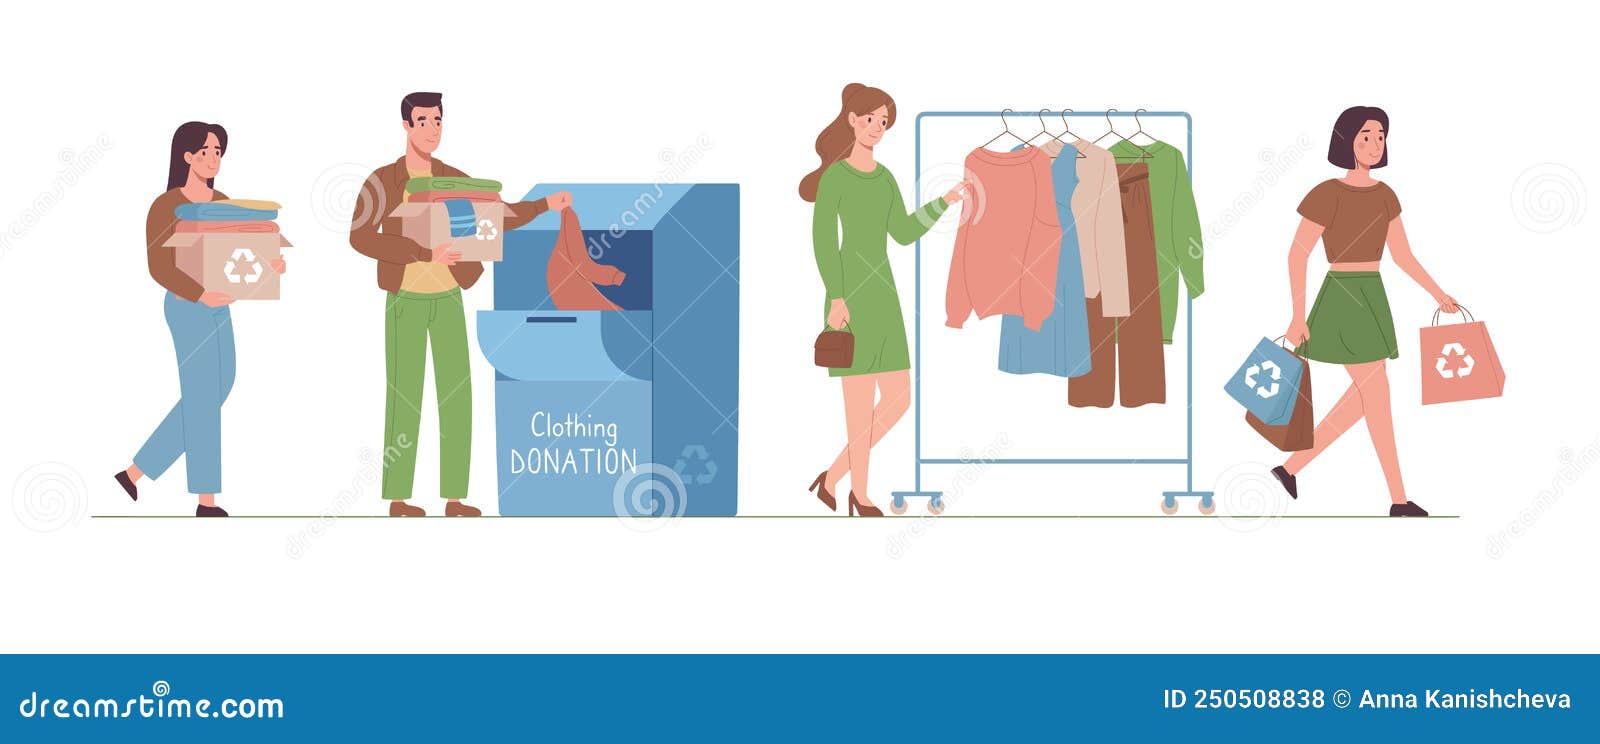 https://thumbs.dreamstime.com/z/textile-recycling-eco-concept-people-recycle-their-used-clothes-to-create-friendly-fashion-women-men-donate-clothing-charity-250508838.jpg